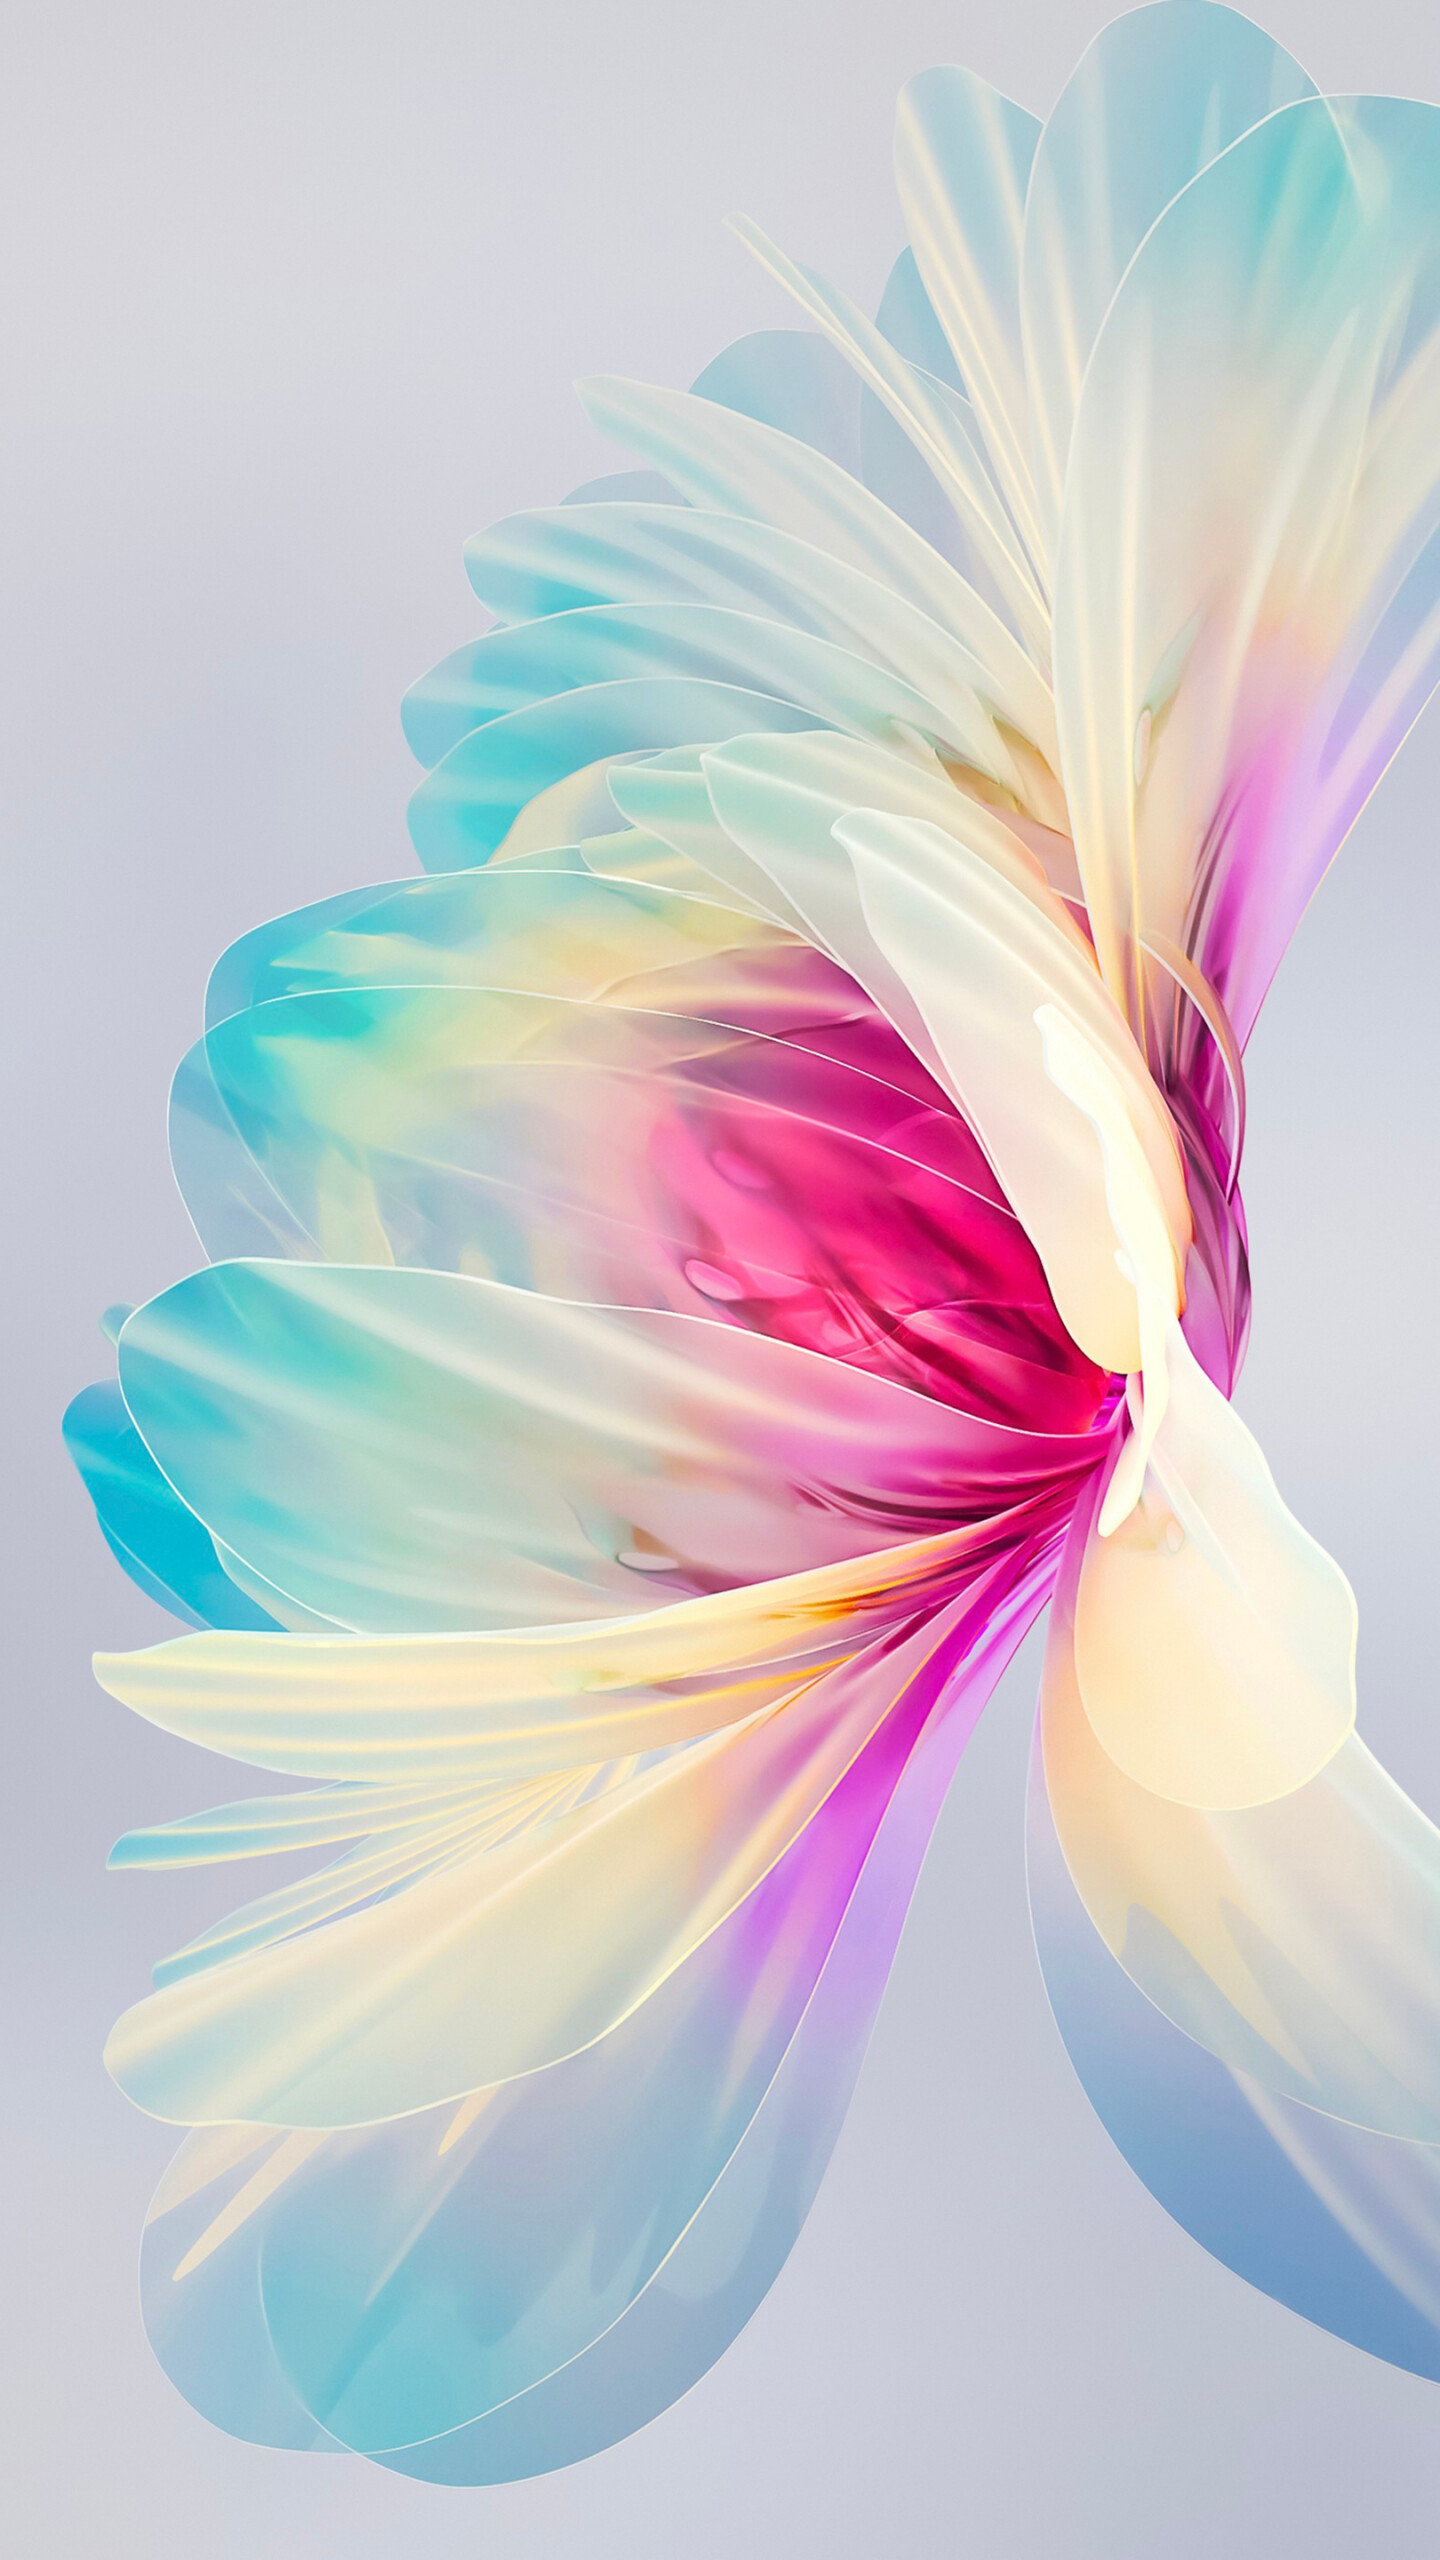 Girly: Blooming flower, Petals, A bloom or blossom, Botanic, Flowering plant. 1440x2560 HD Wallpaper.